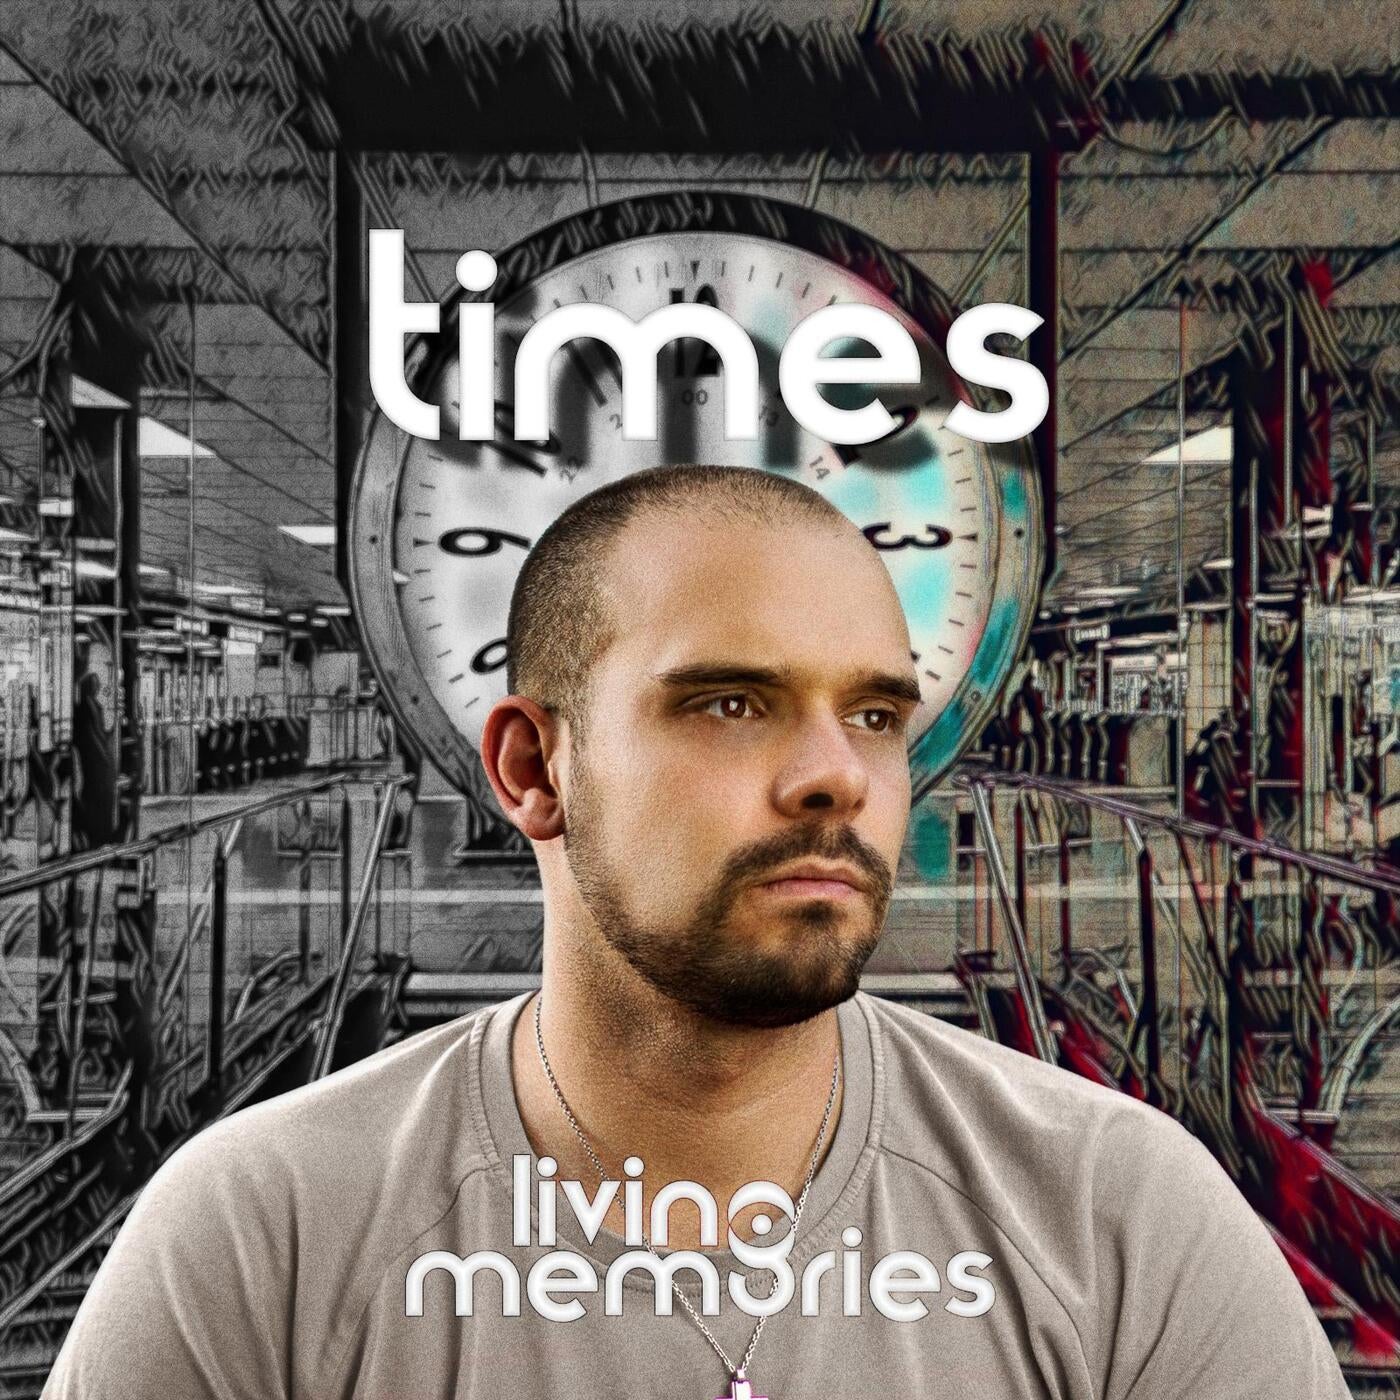 Times (Extended Version)